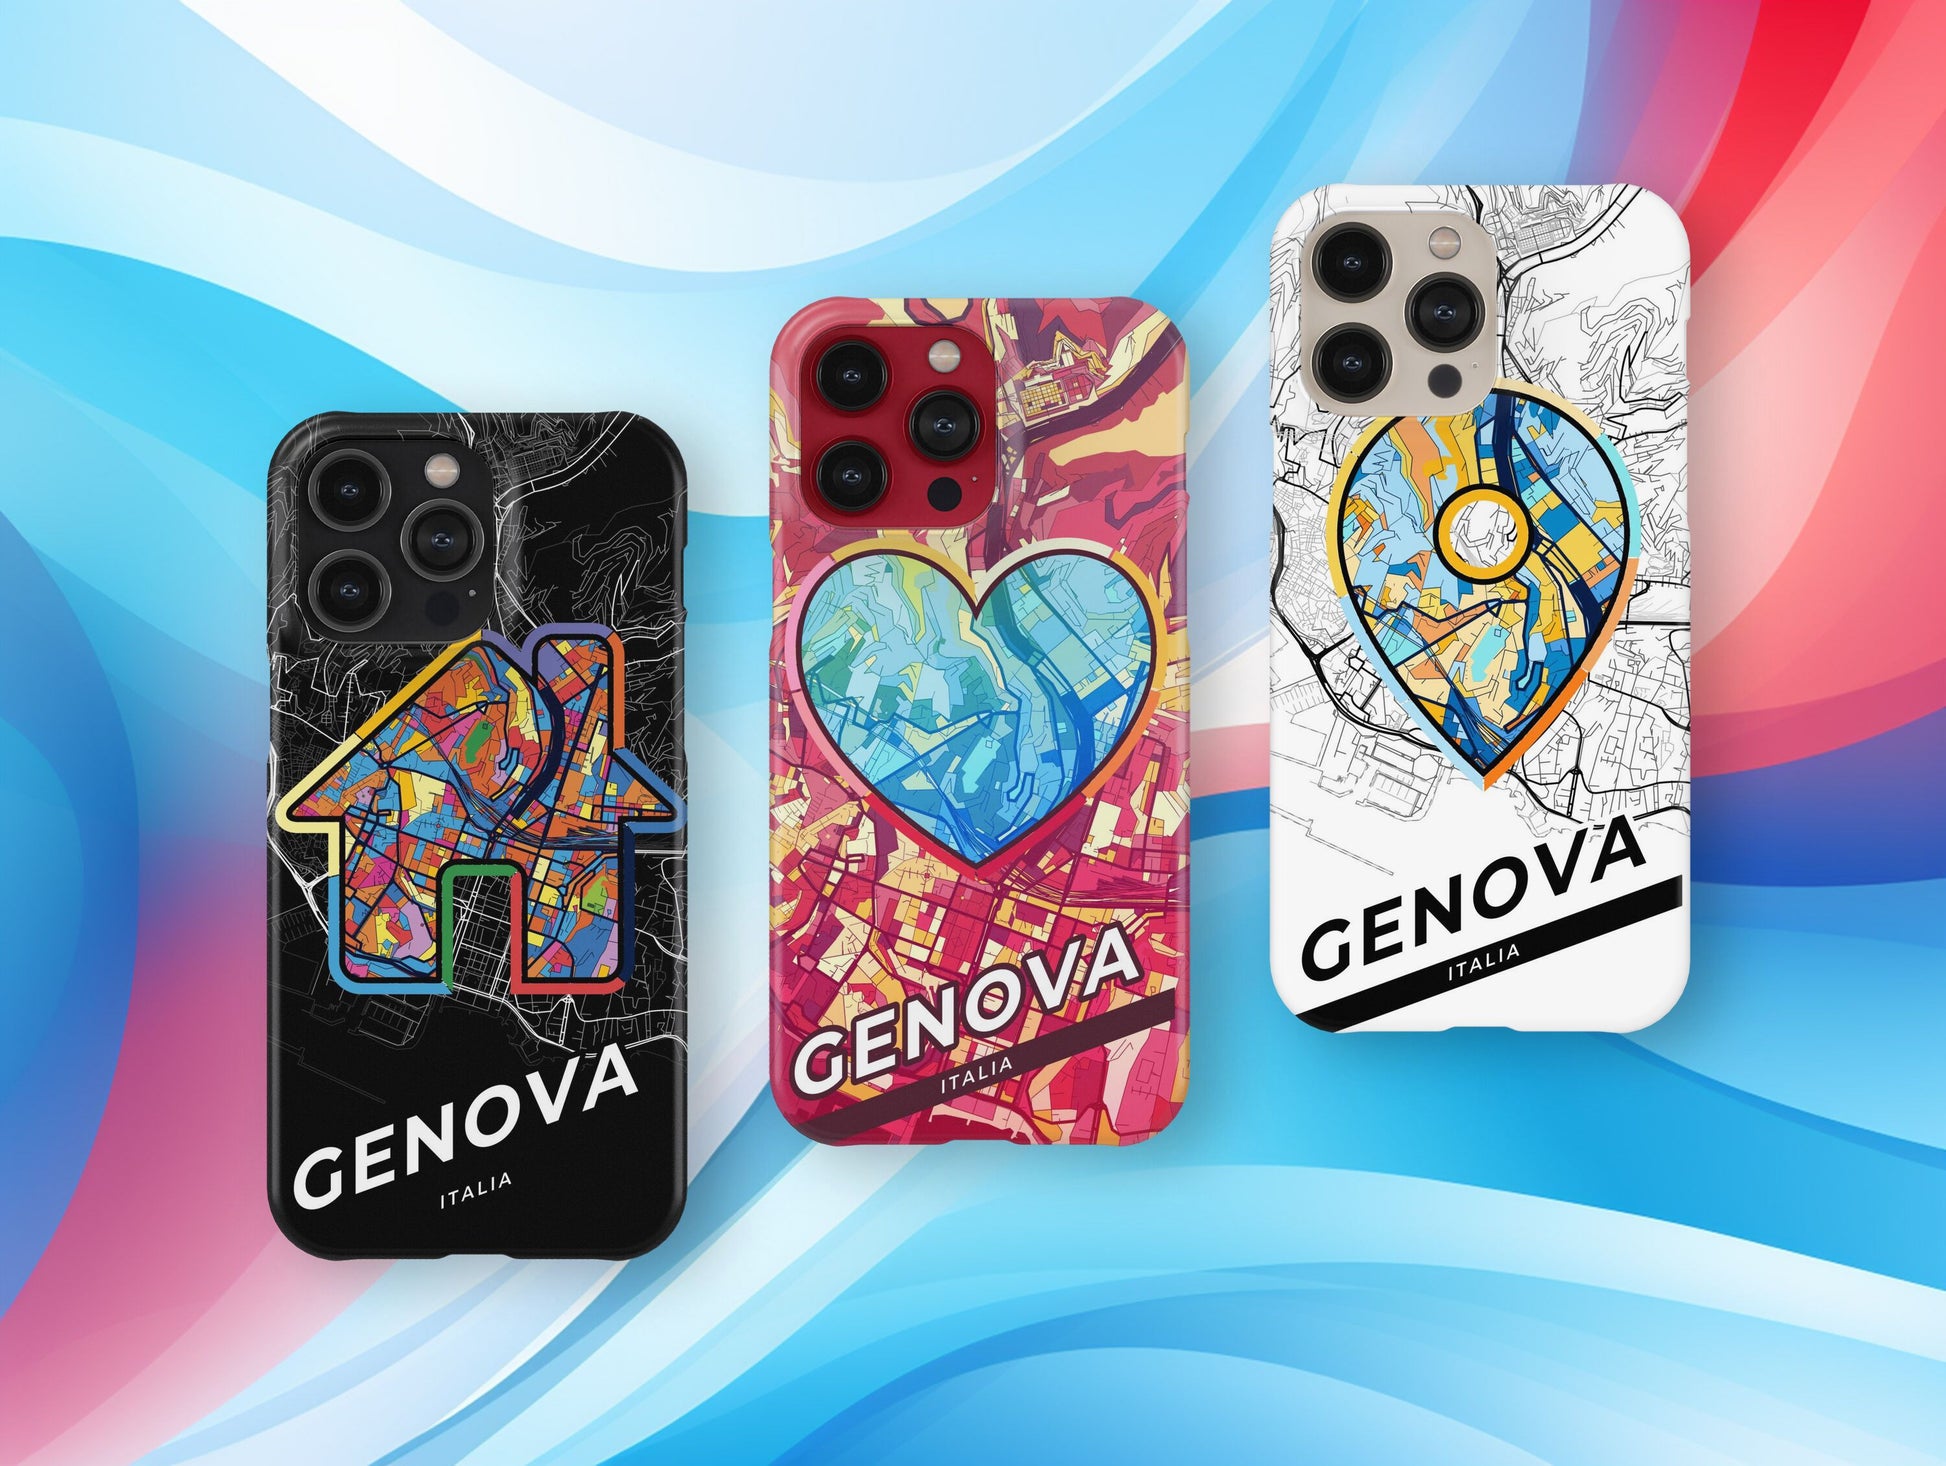 Genoa Italy slim phone case with colorful icon. Birthday, wedding or housewarming gift. Couple match cases.